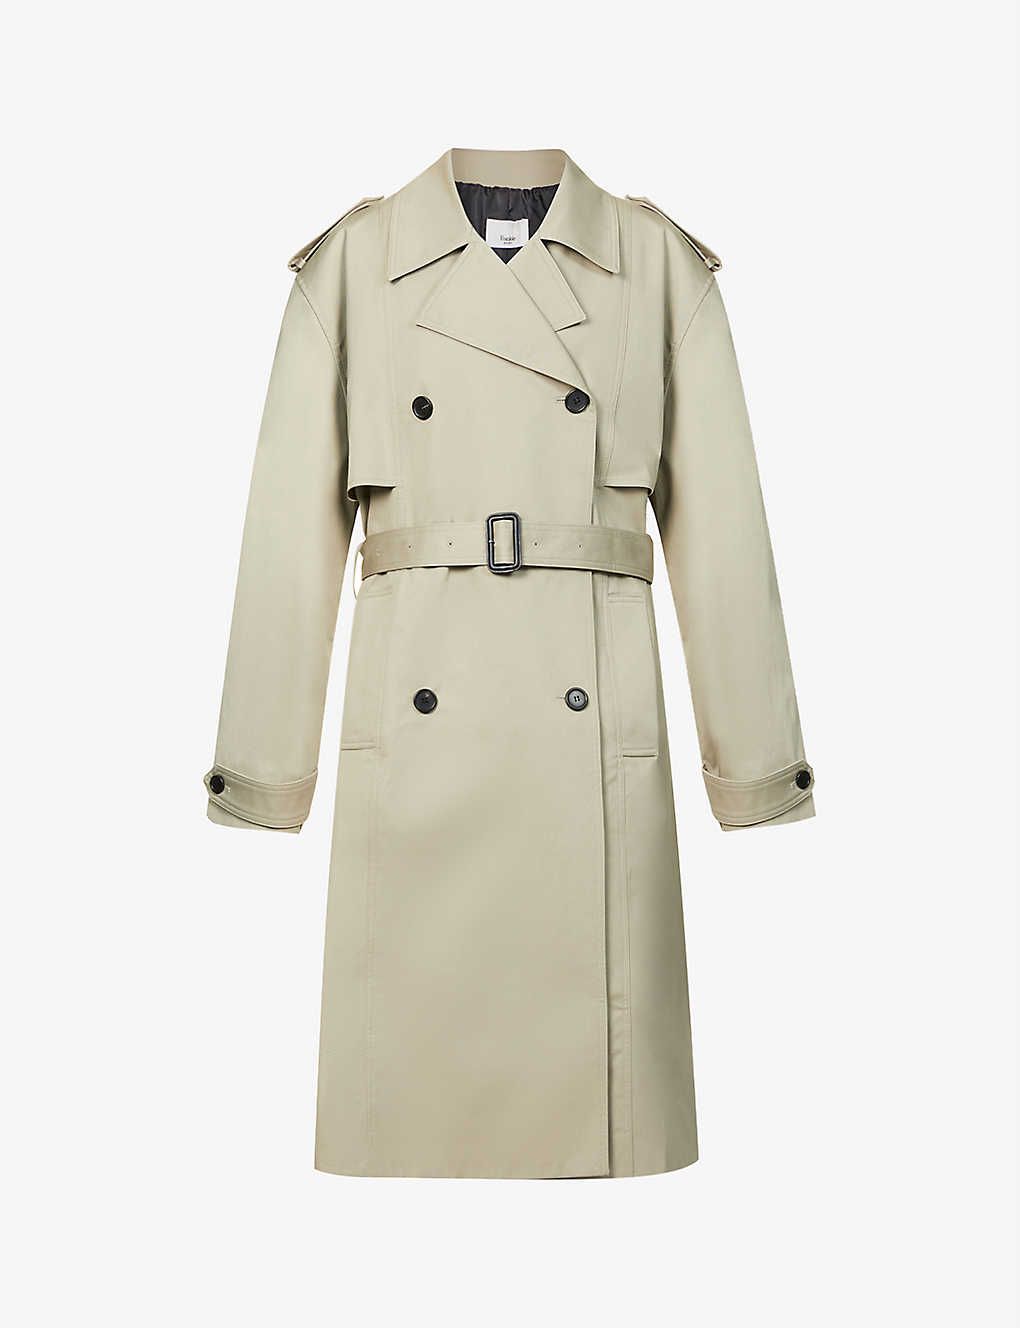 40 Classic Trench Coats For Women - Trench Coats 2022